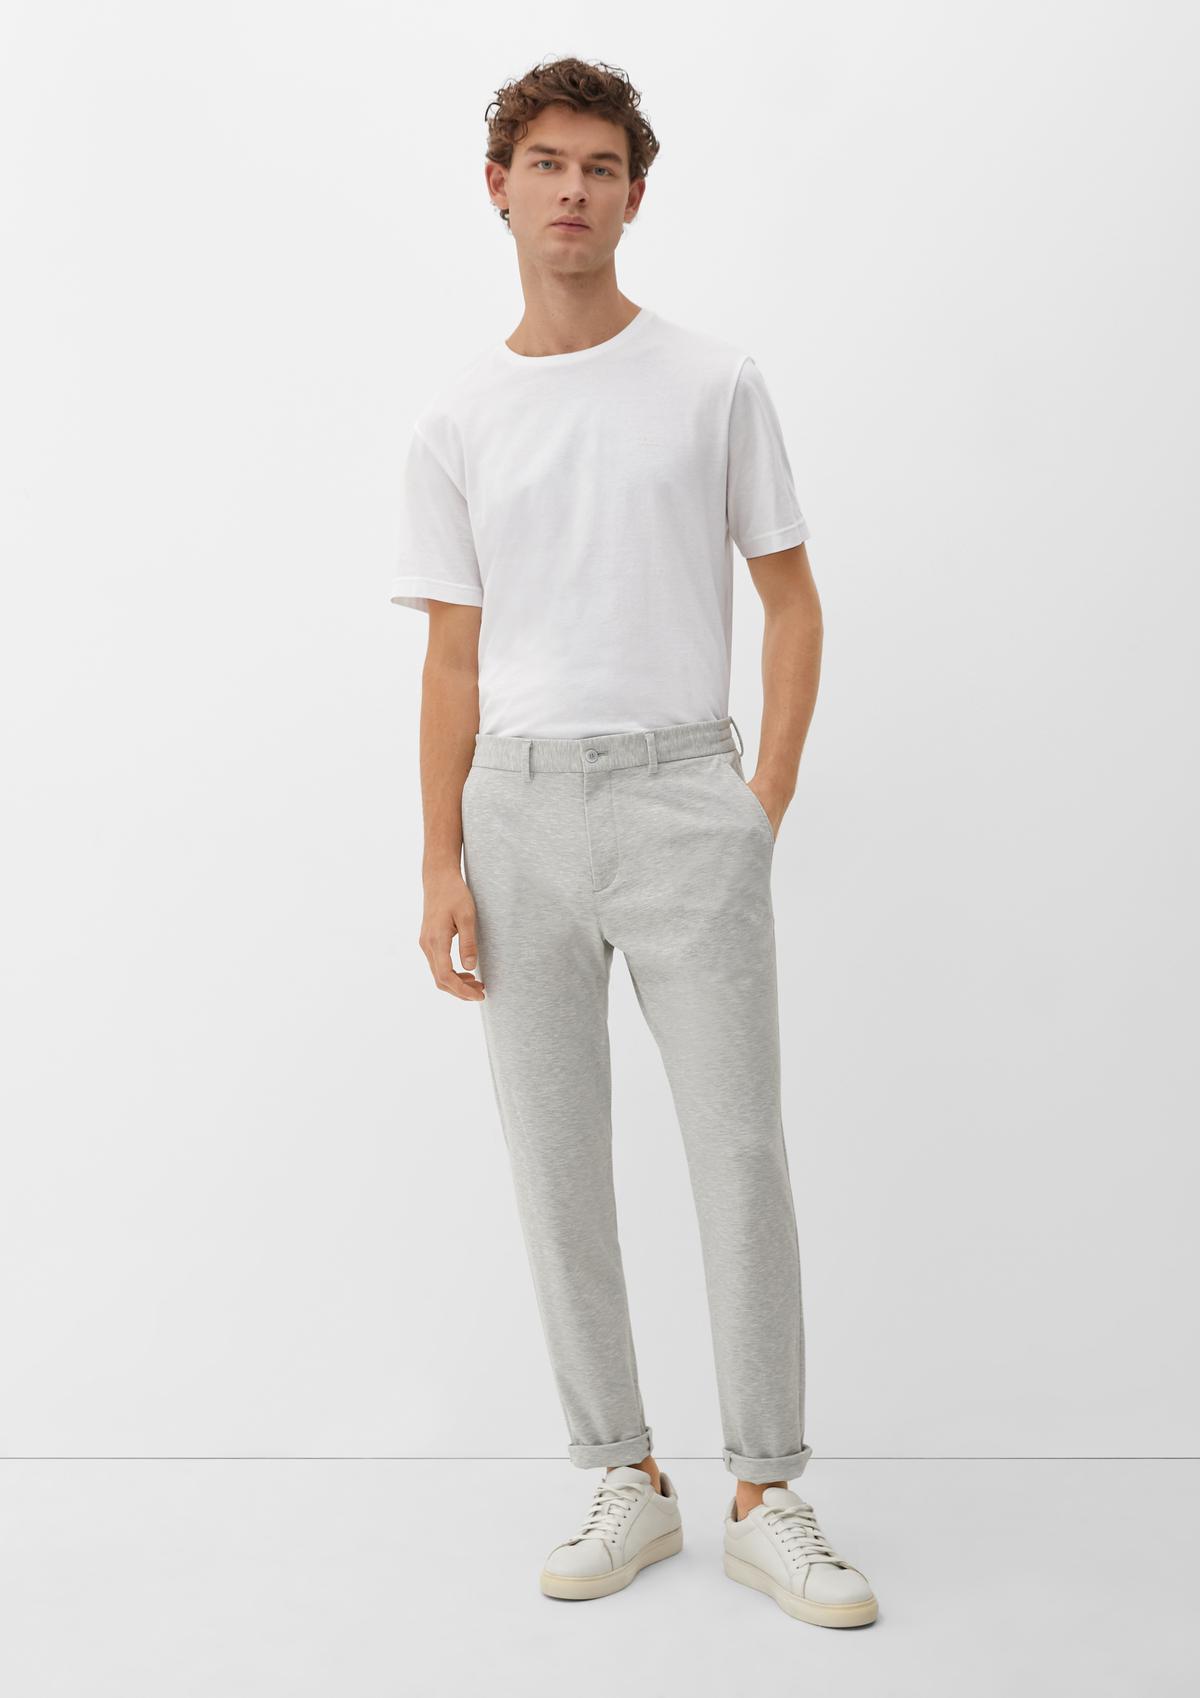 Slim fit: Tracksuit fabric trousers made of stretch jersey